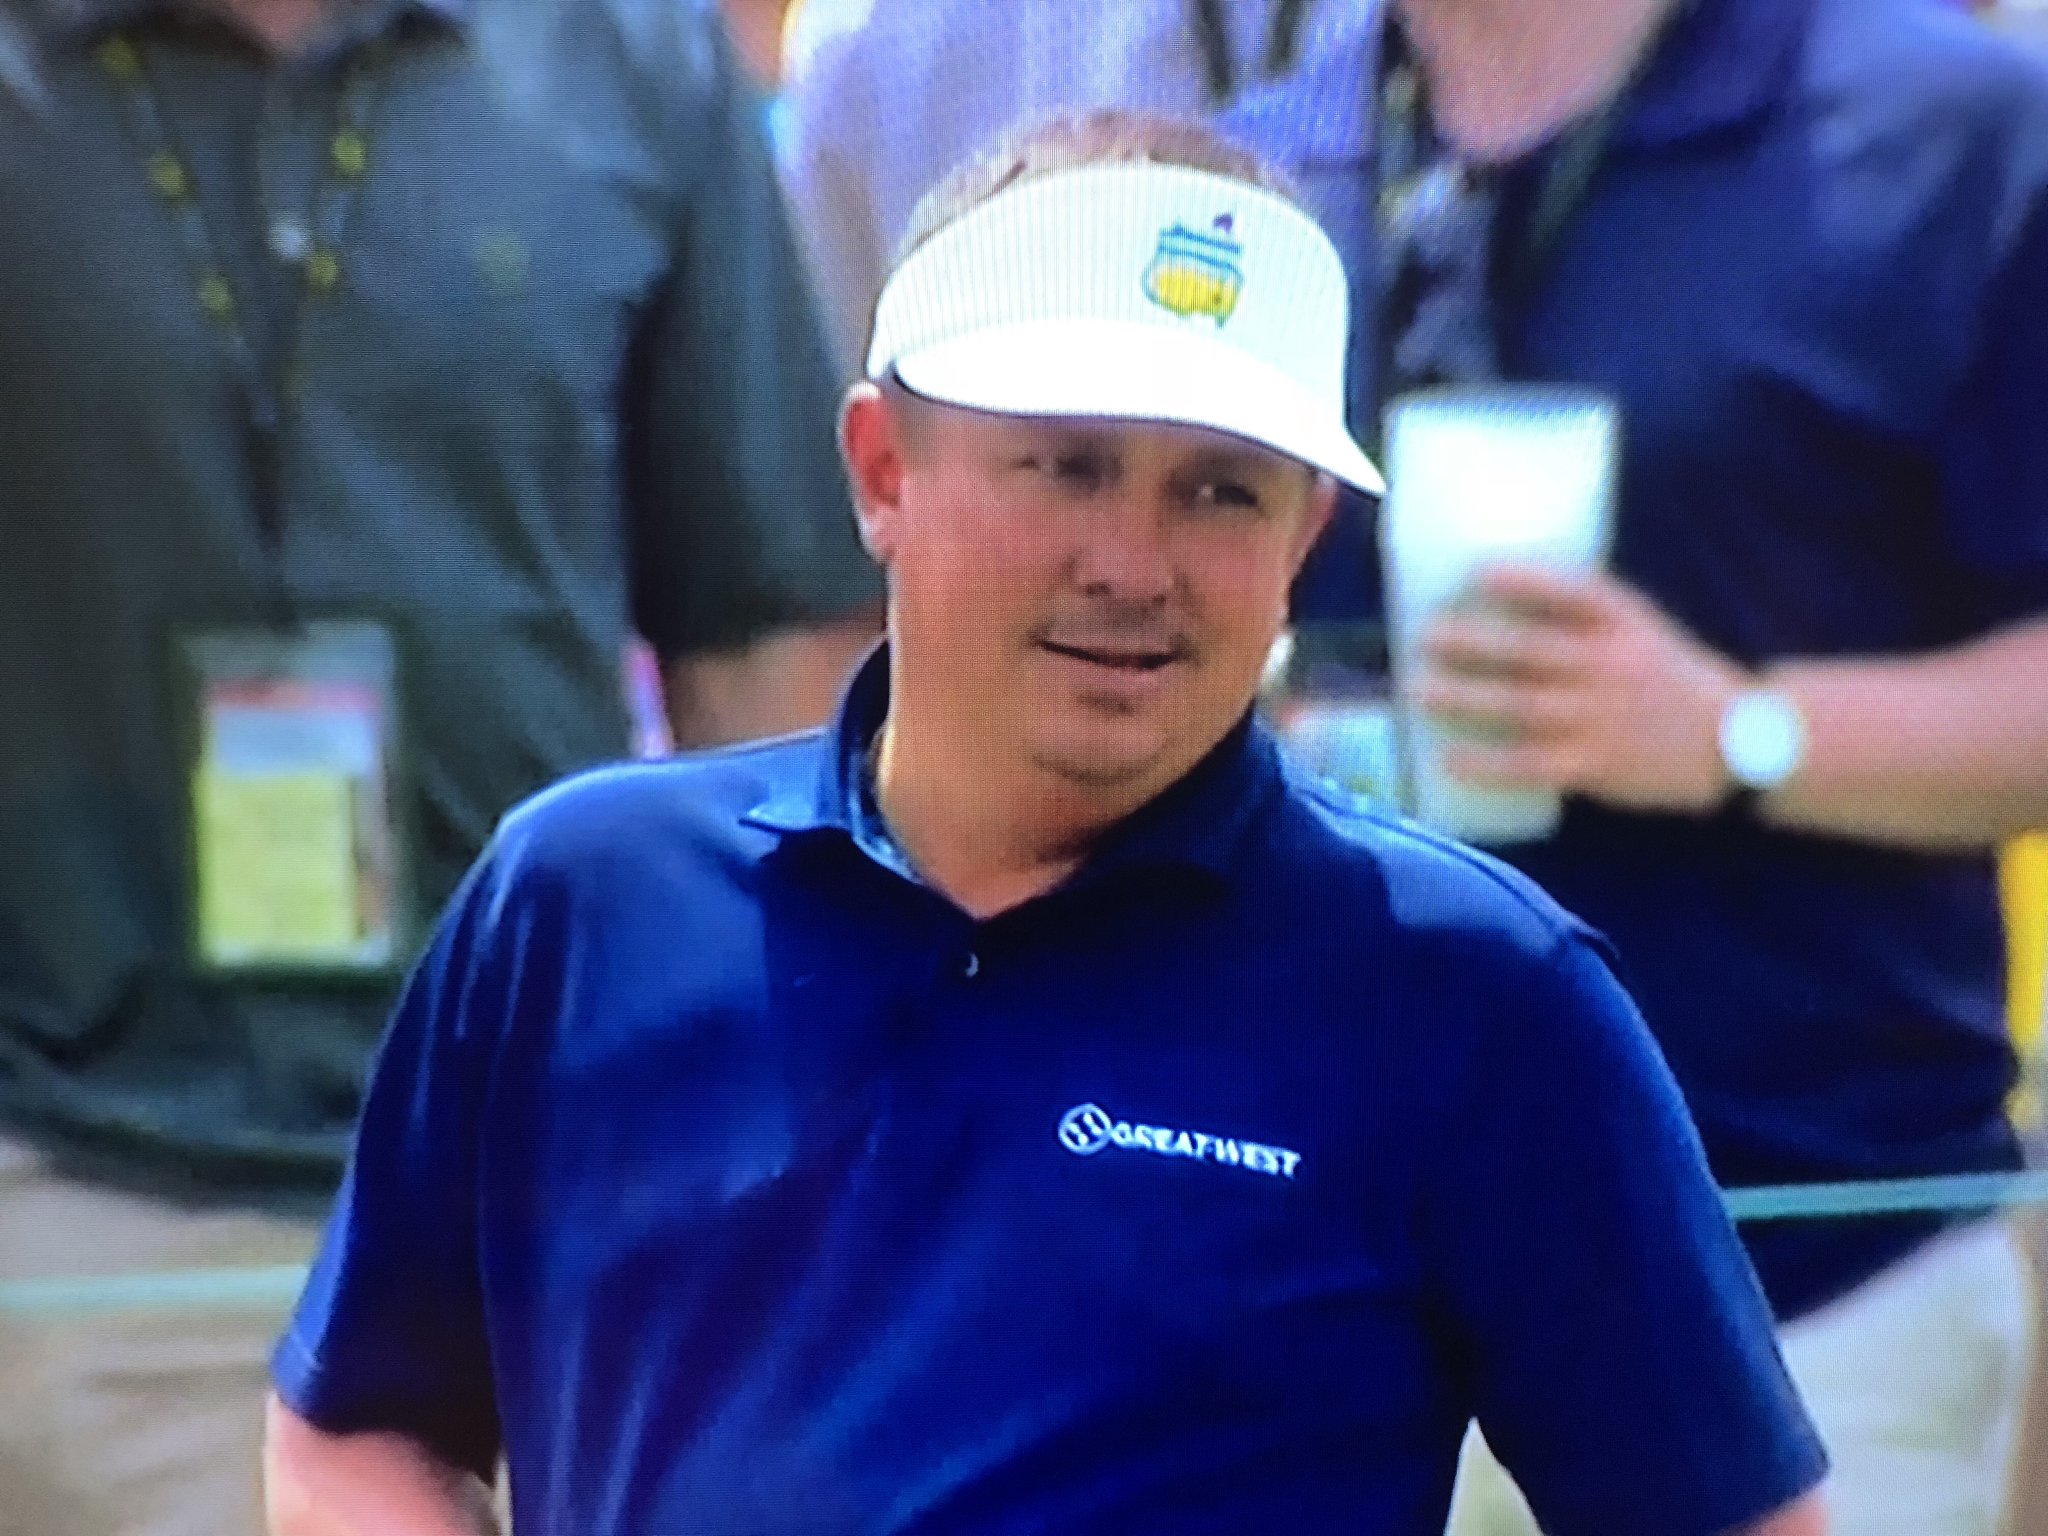 Chaney on Twitter: "Duf Members visor at the Masters. https://t.co/zM0SDwNk3Y" / Twitter